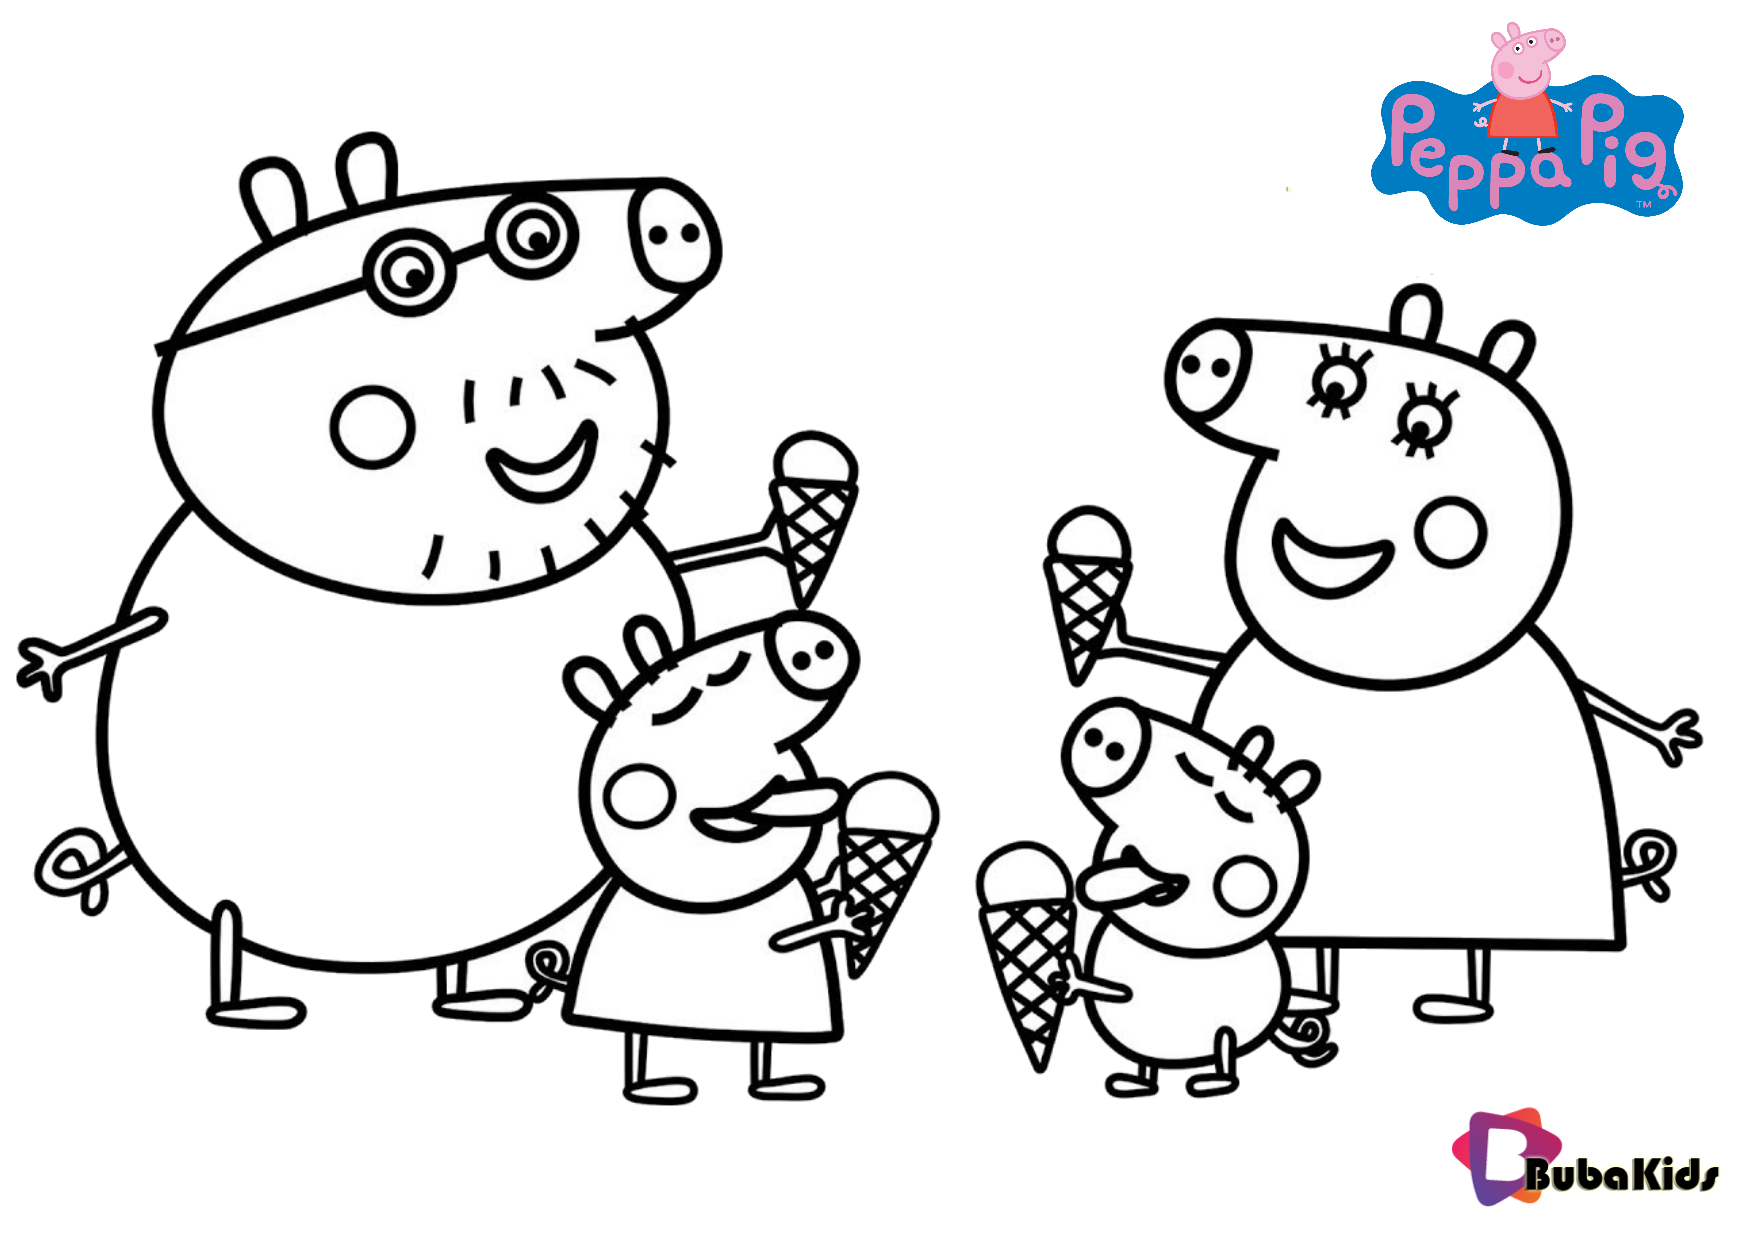 695 Simple Peppa Pig Coloring Pages for Kindergarten